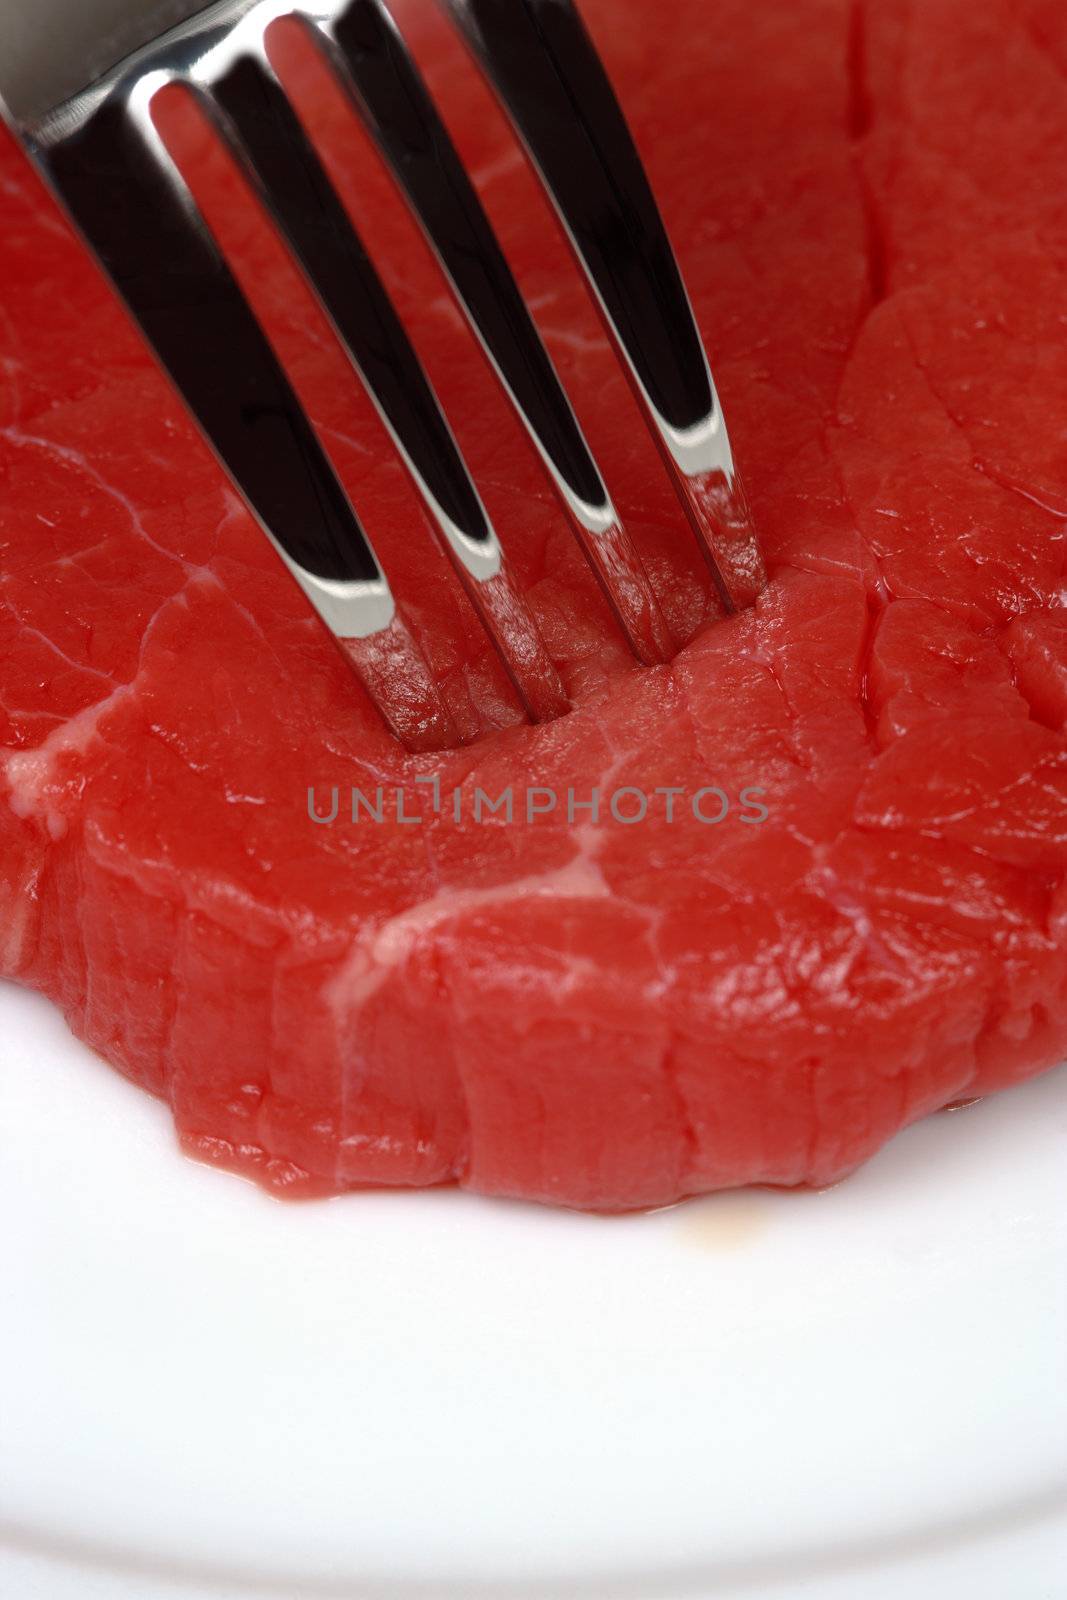 Dinner plate with a fork piercing raw red meat.
